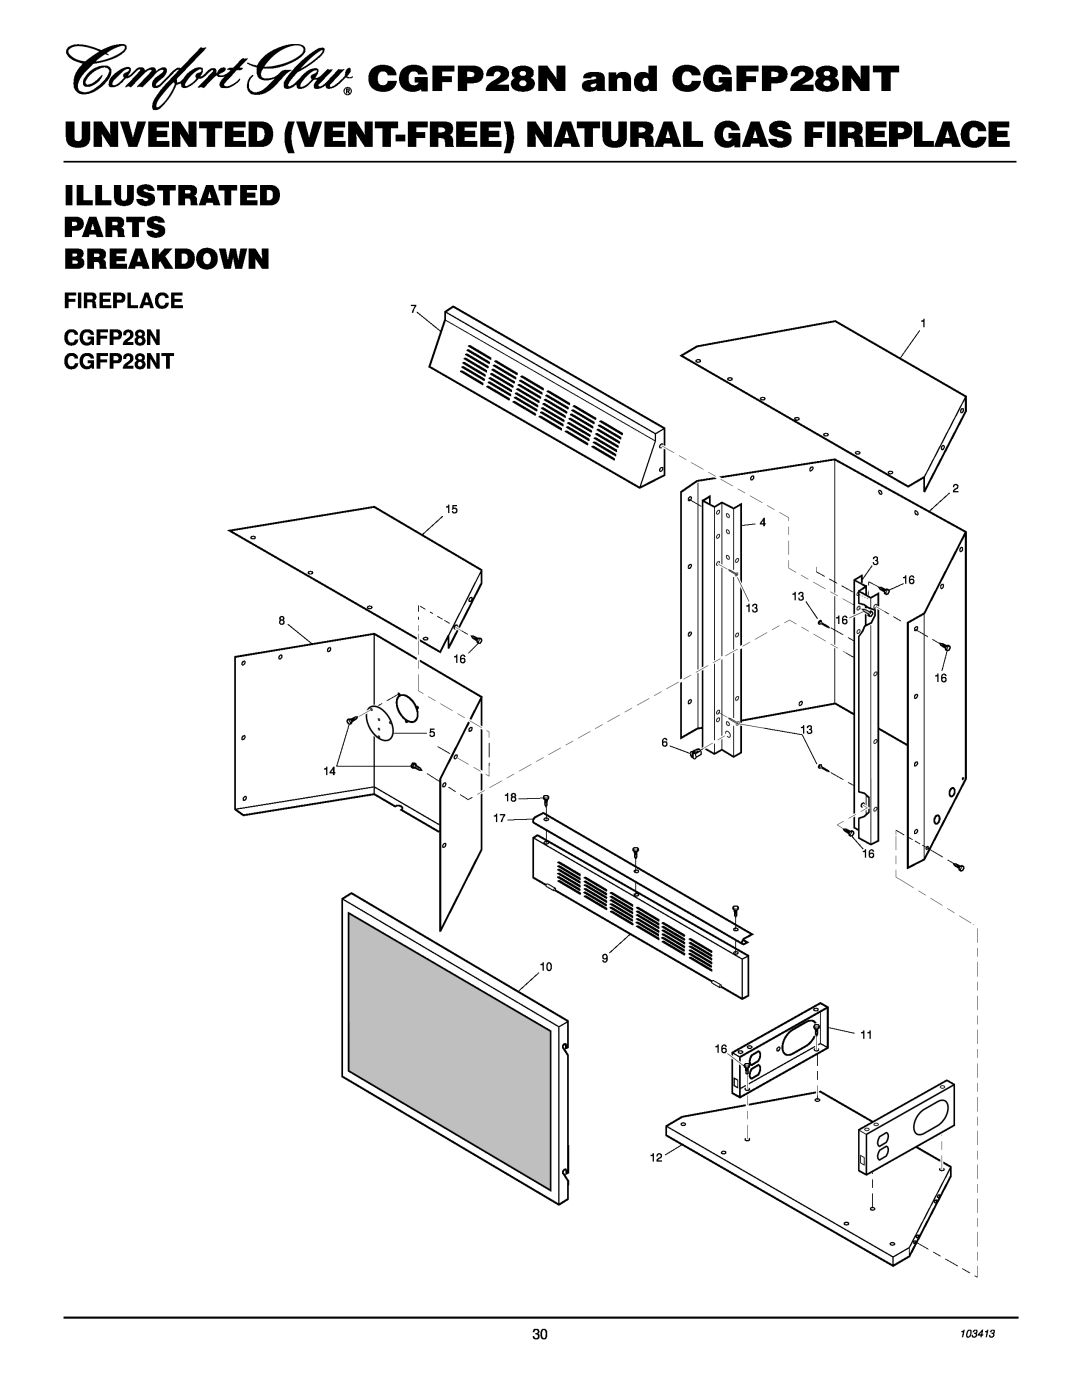 Desa installation manual FIREPLACE CGFP28N CGFP28NT, CGFP28N and CGFP28NT, Unvented Vent-Freenatural Gas Fireplace 